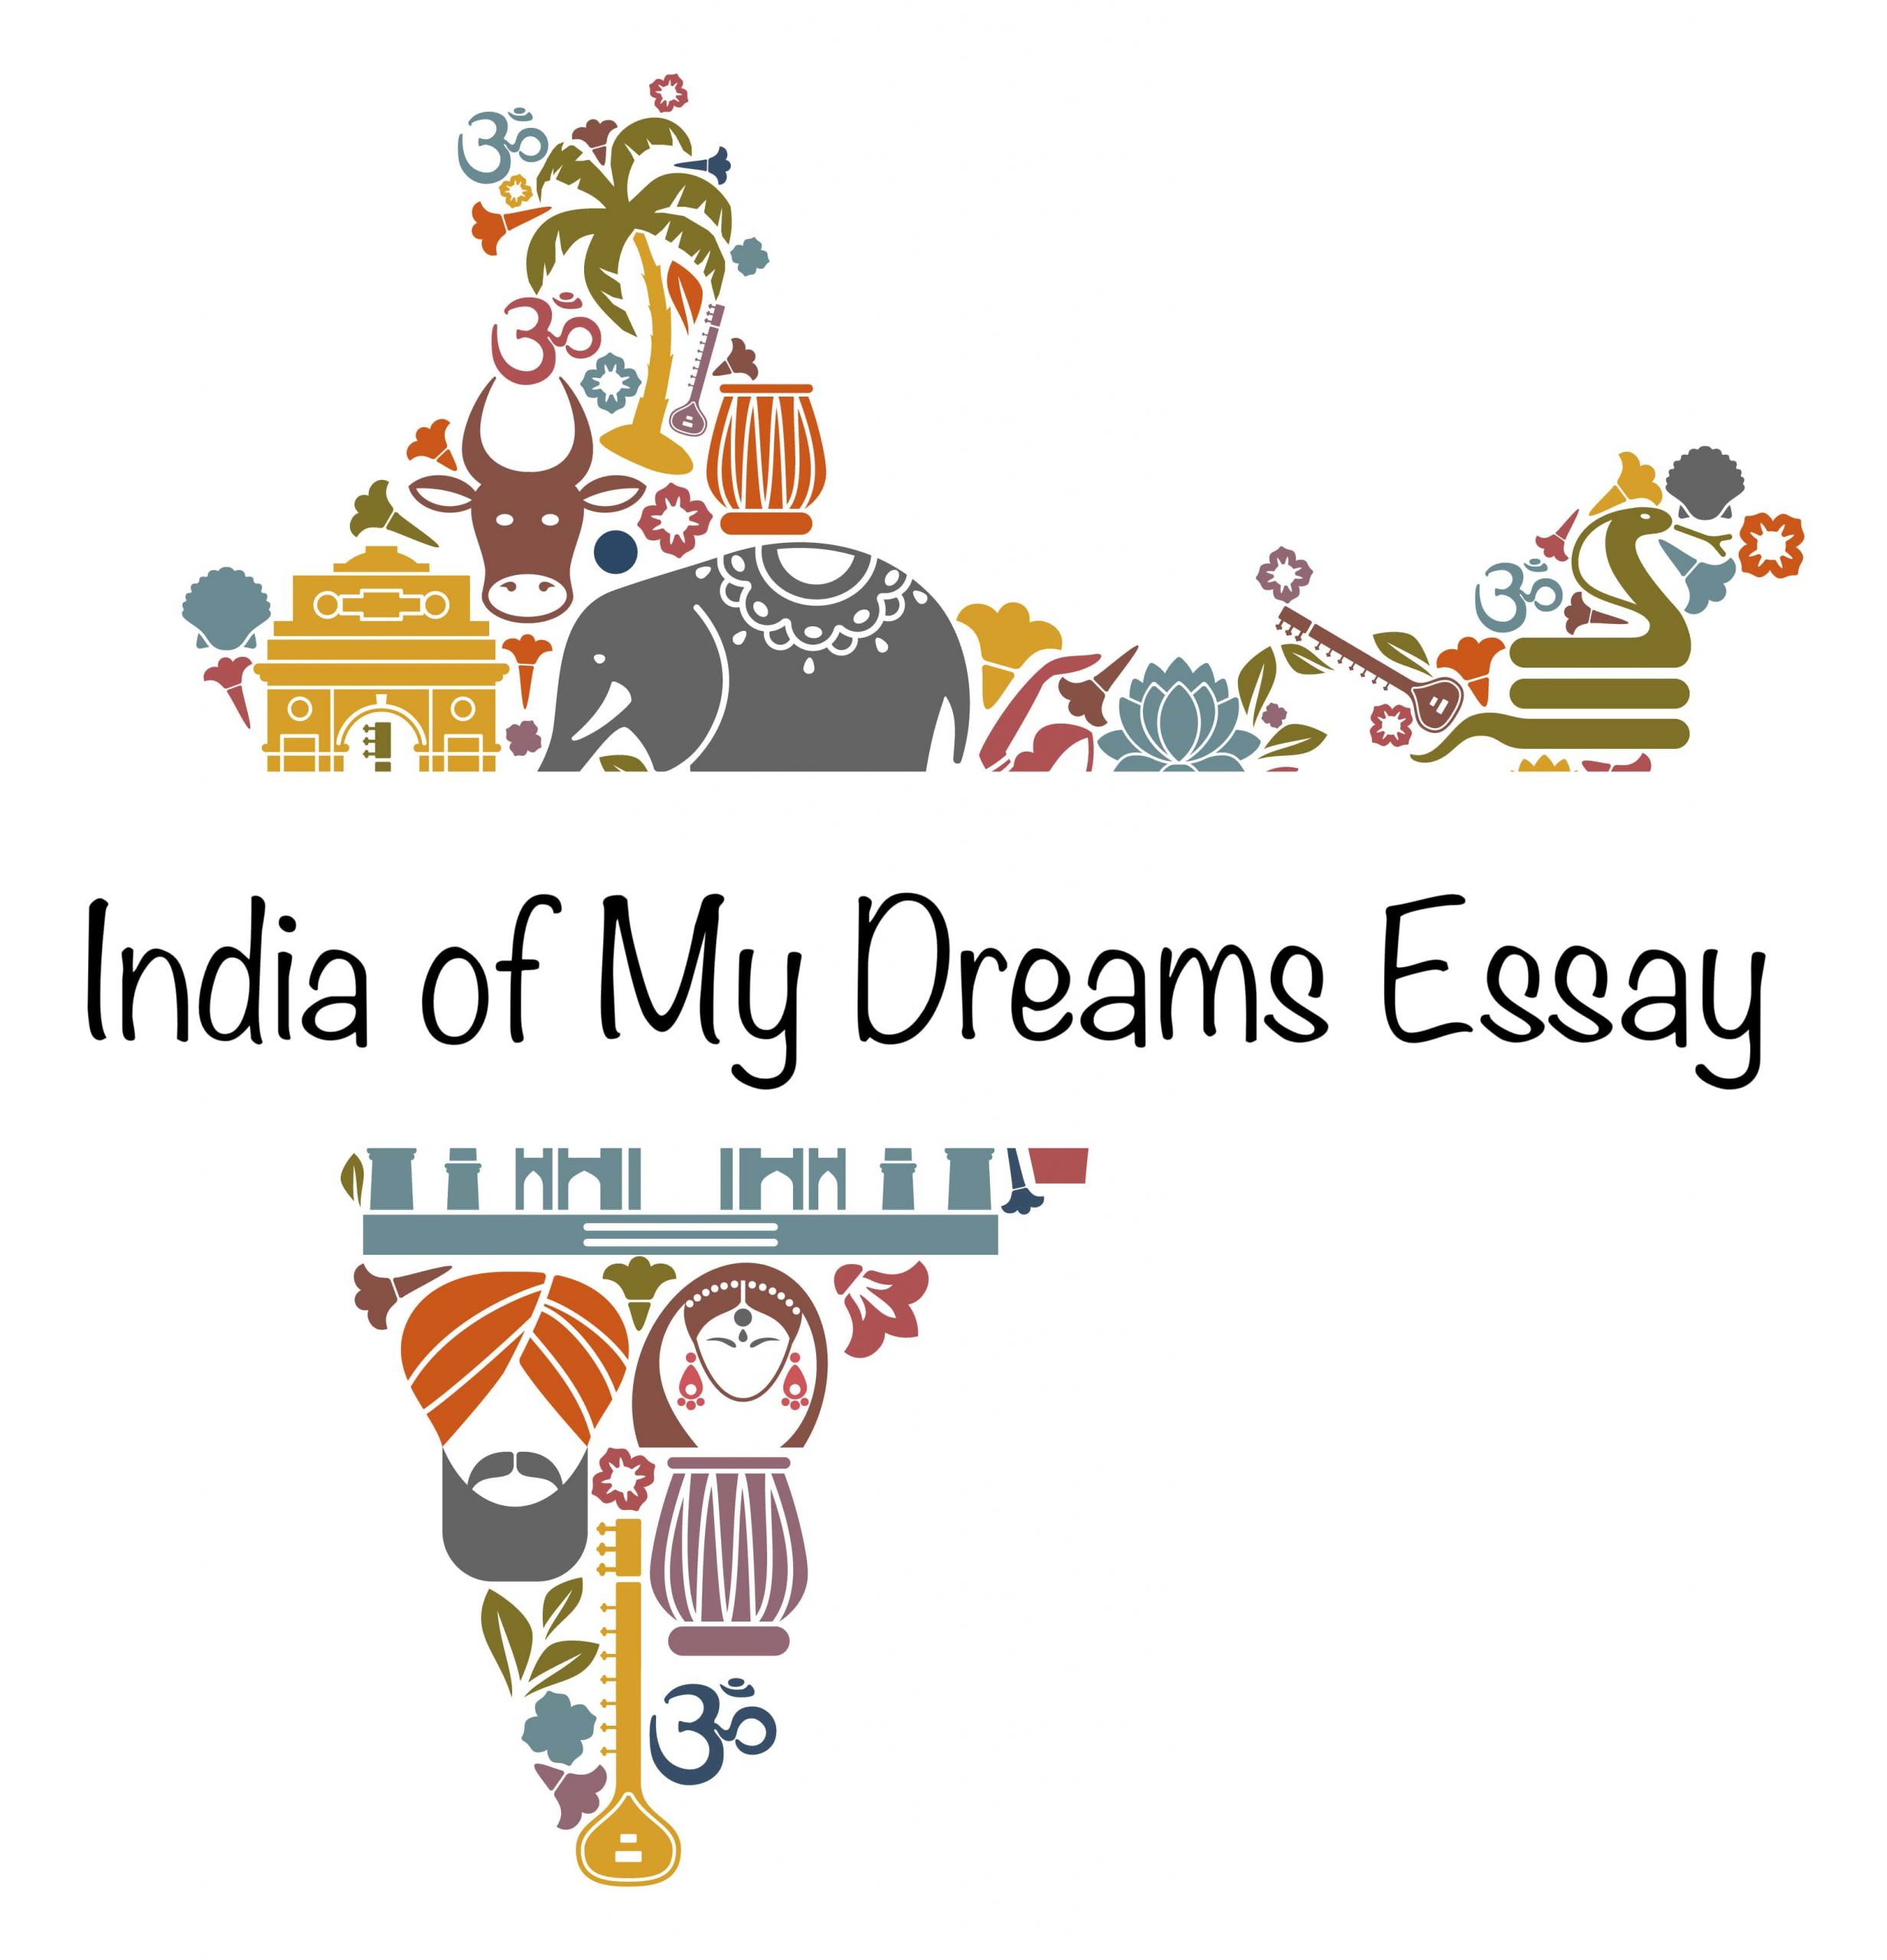 essay on india of my dreams 300 words